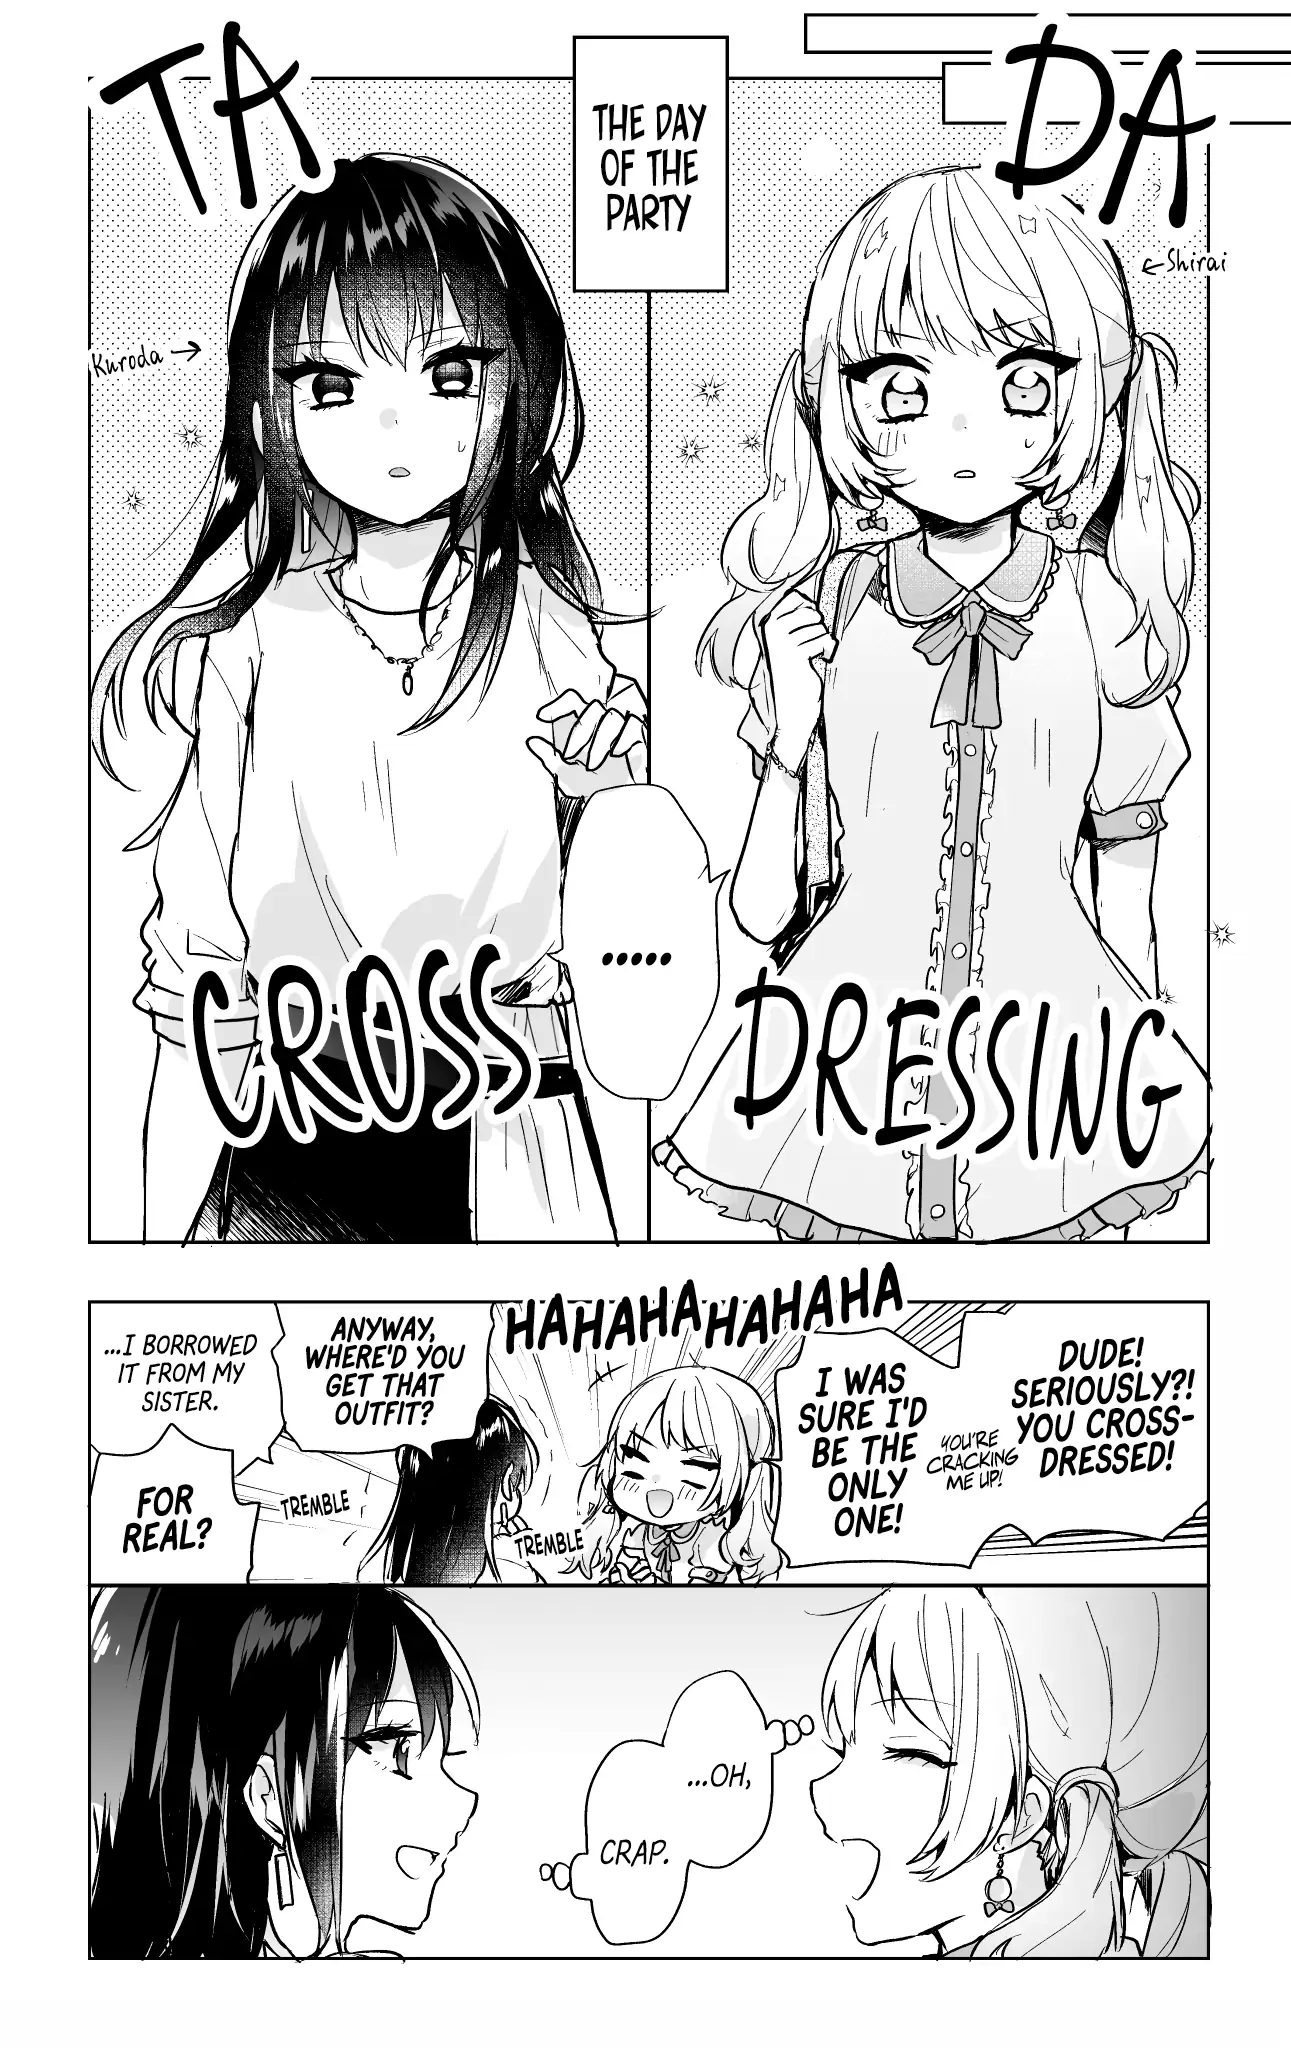 Cover for When You Crossdress to Surprise Your Friend